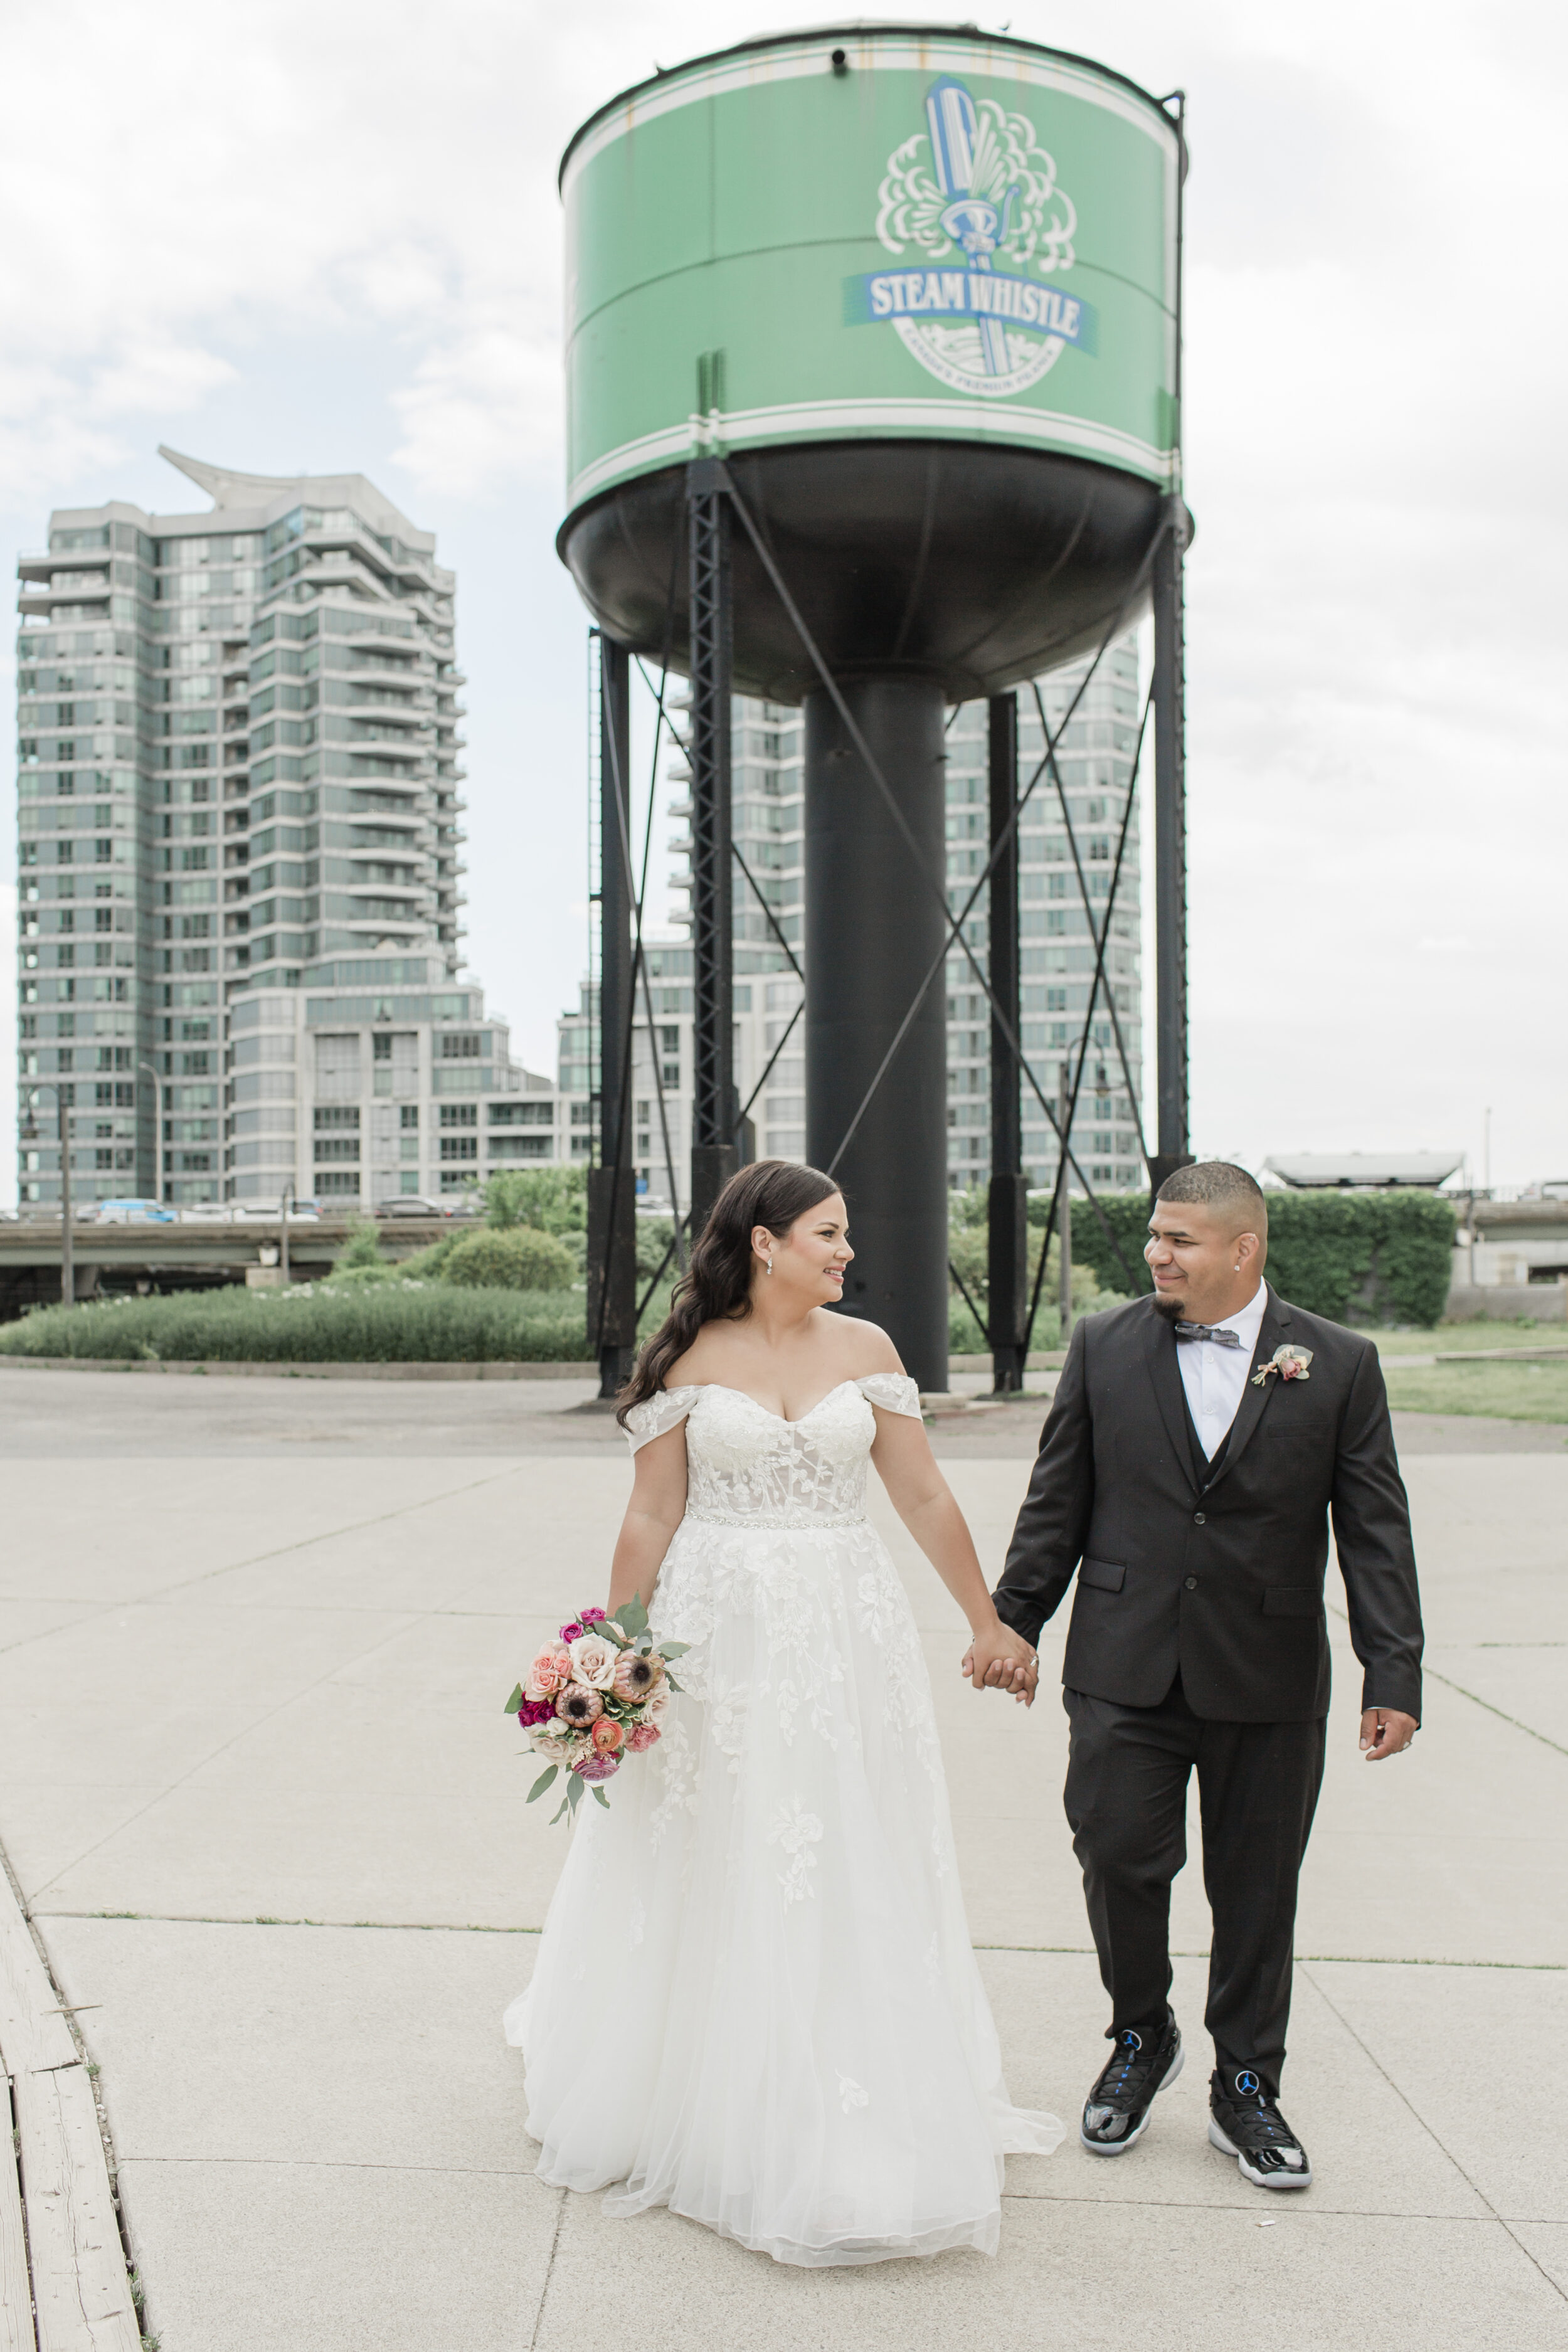 A couple stands beneath a water tower in downtown Toronto while wearing wedding attire.